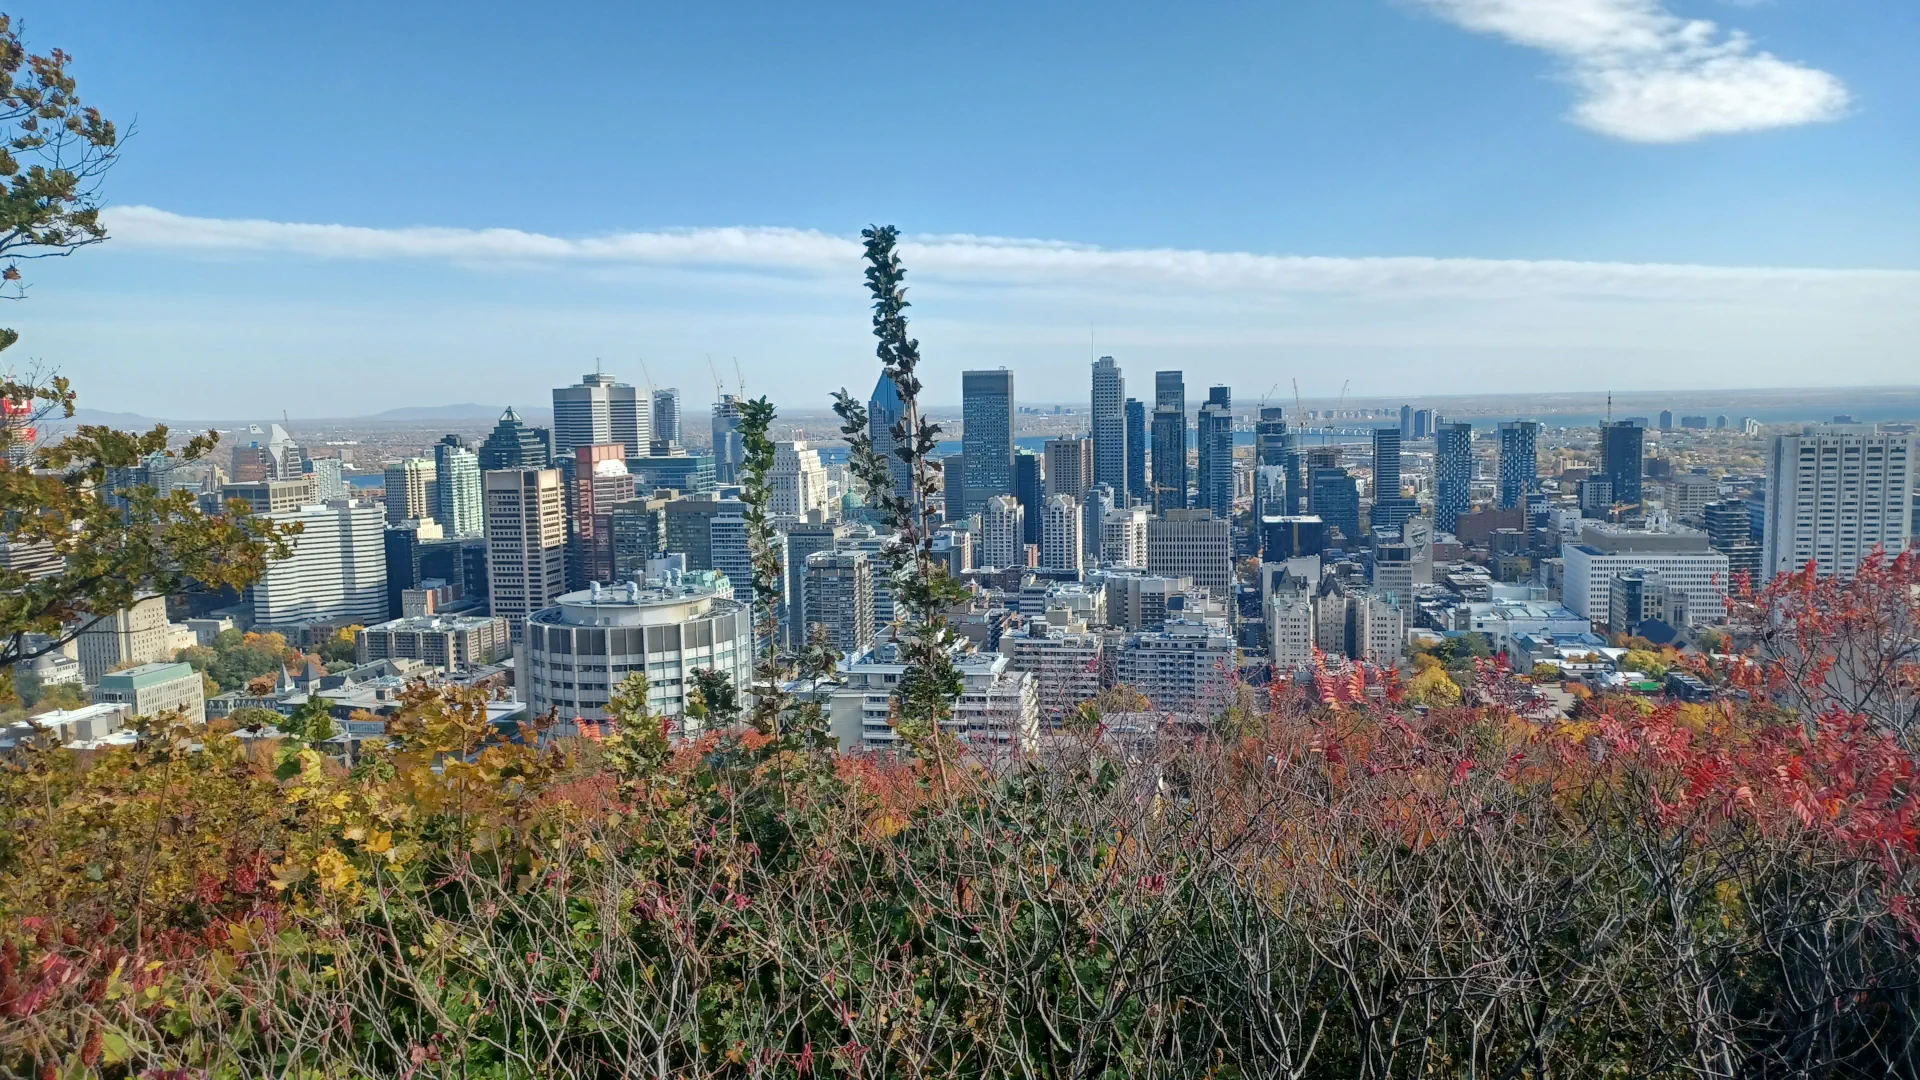 overview of the Montreal skyline in daylight from the Mount Royal Chalet